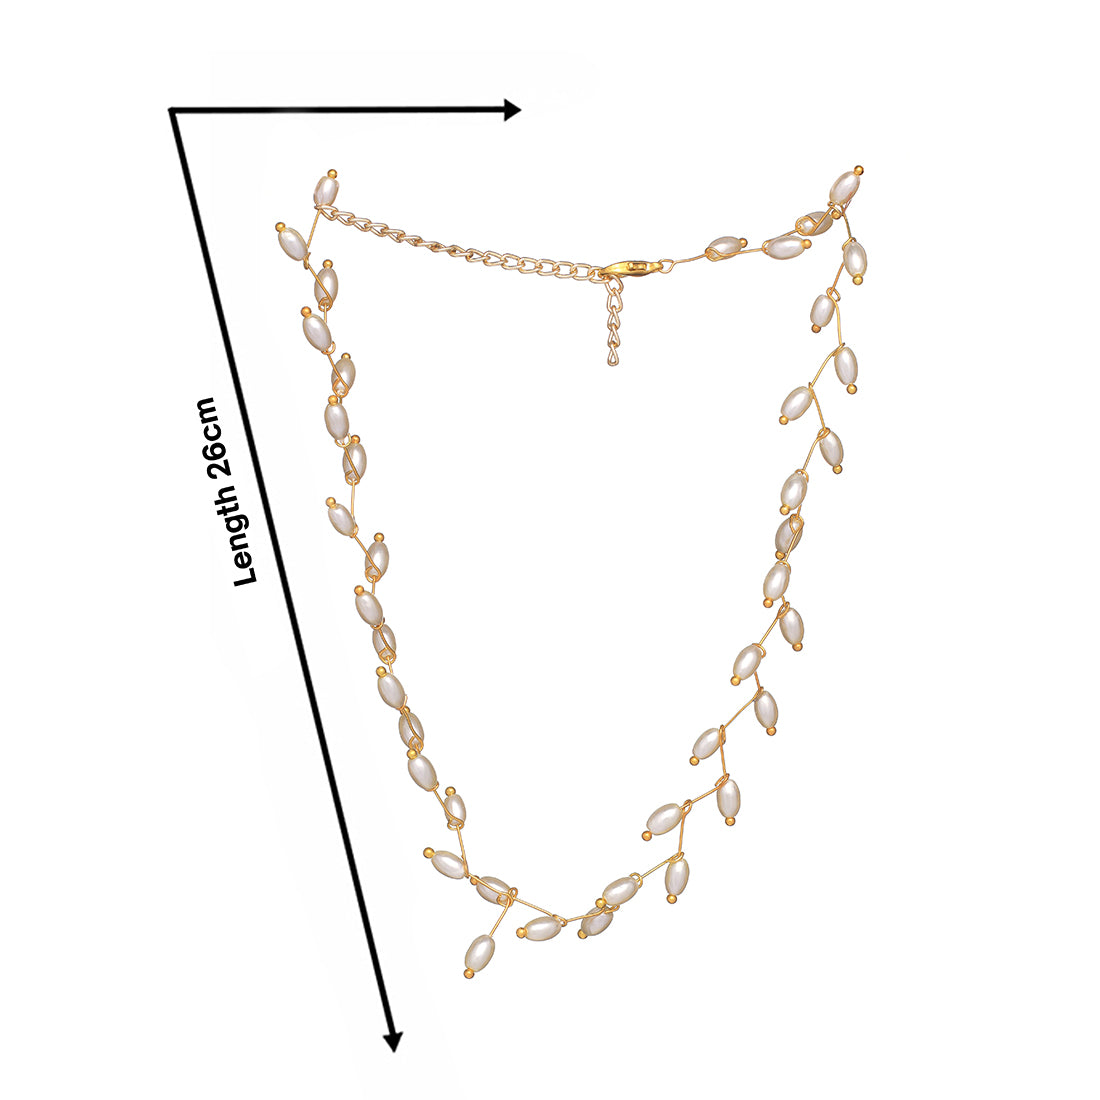 Gold-Tone Choker Necklace With Oval Pearls Arranged In A Leaf Pattern